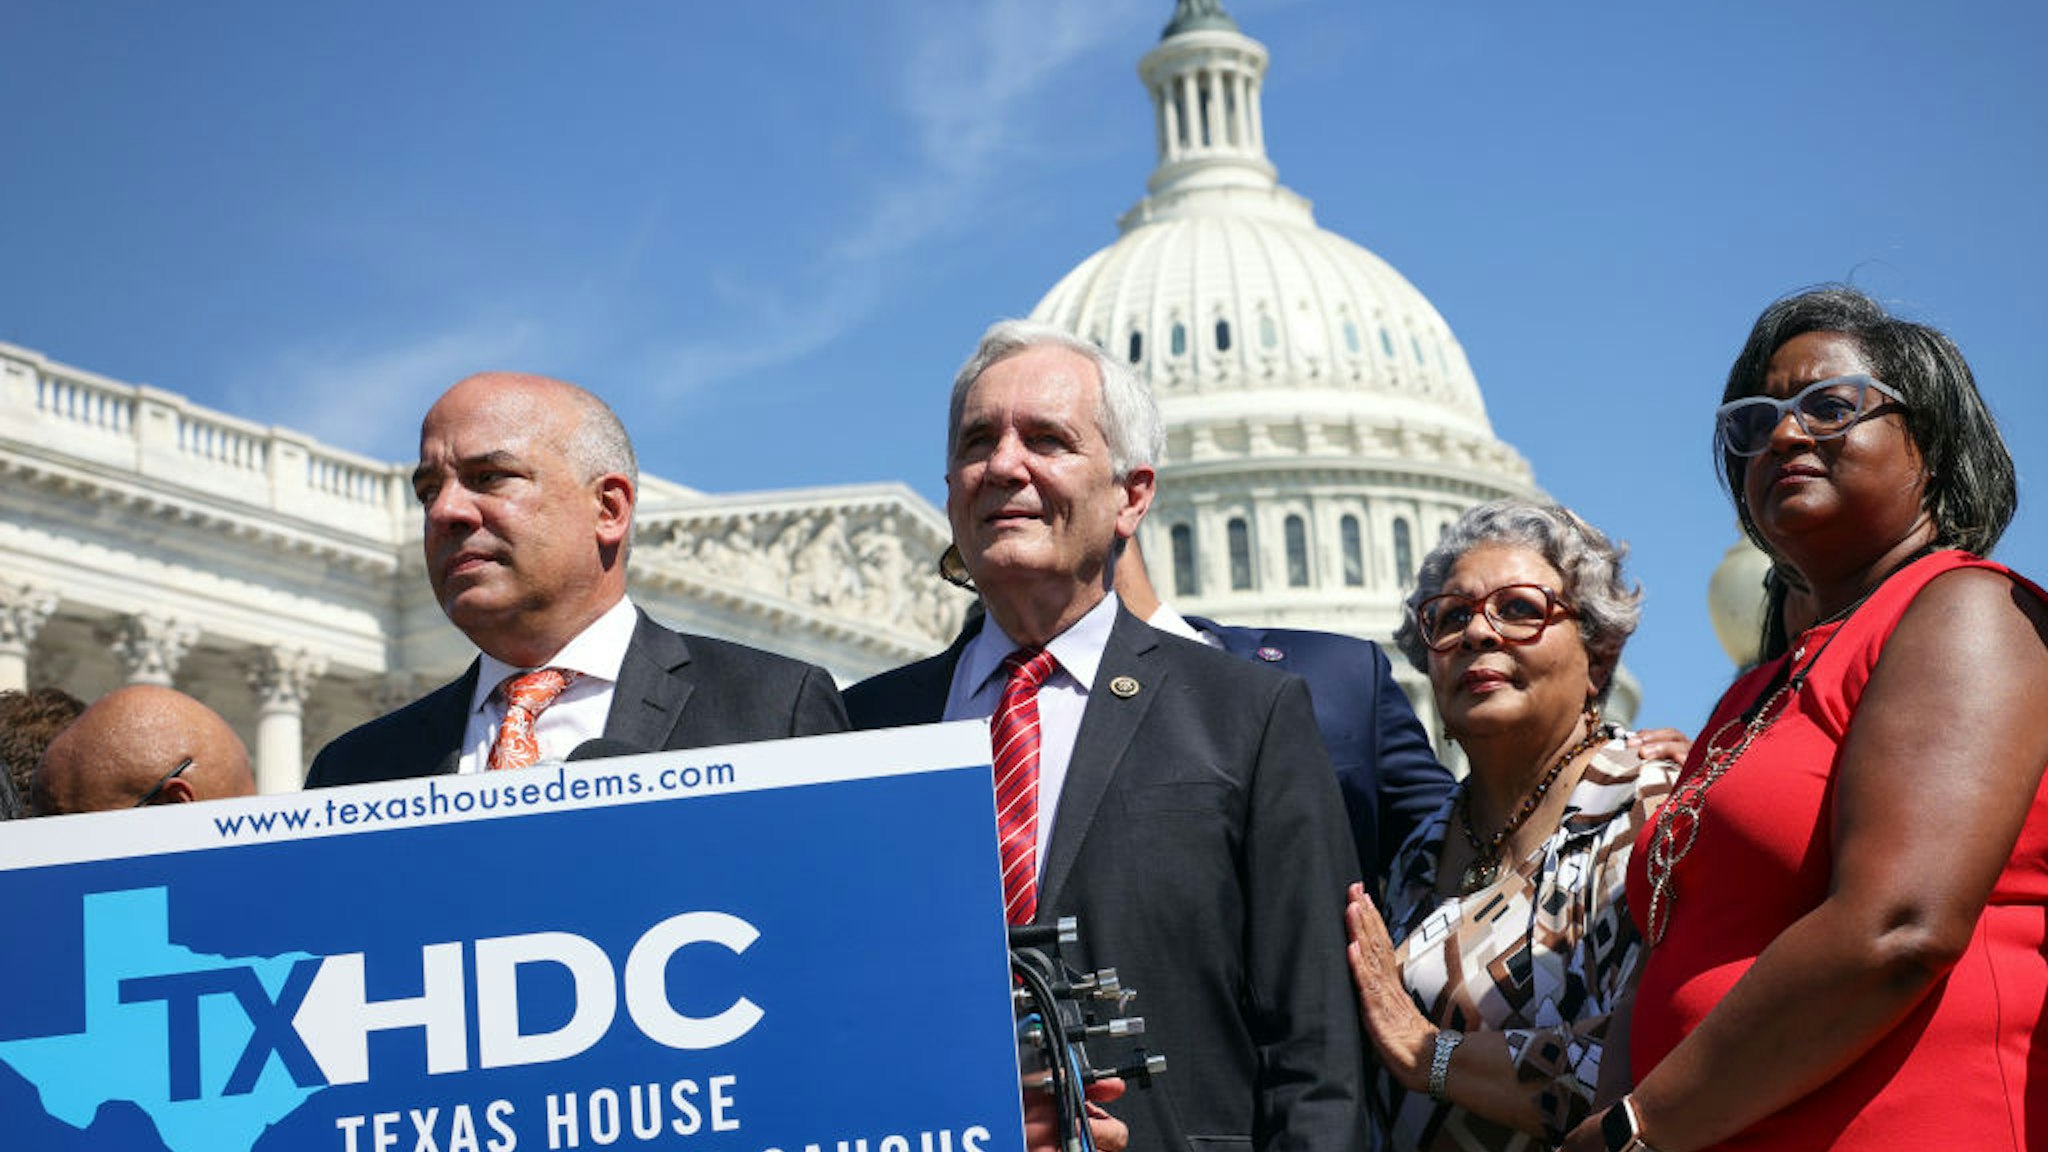 Texas State Democrats (L-R) Democratic Chair Rep. Chris Turner (TX-101), Rep. Rafael Anchia (TX-103), Rep. Senfronia Thompson (TX-141), and Rep. Rhetta Bowers (TX-113) speak during a news conference on voting rights outside the U.S. Capitol on July 13, 2021 in Washington, DC.